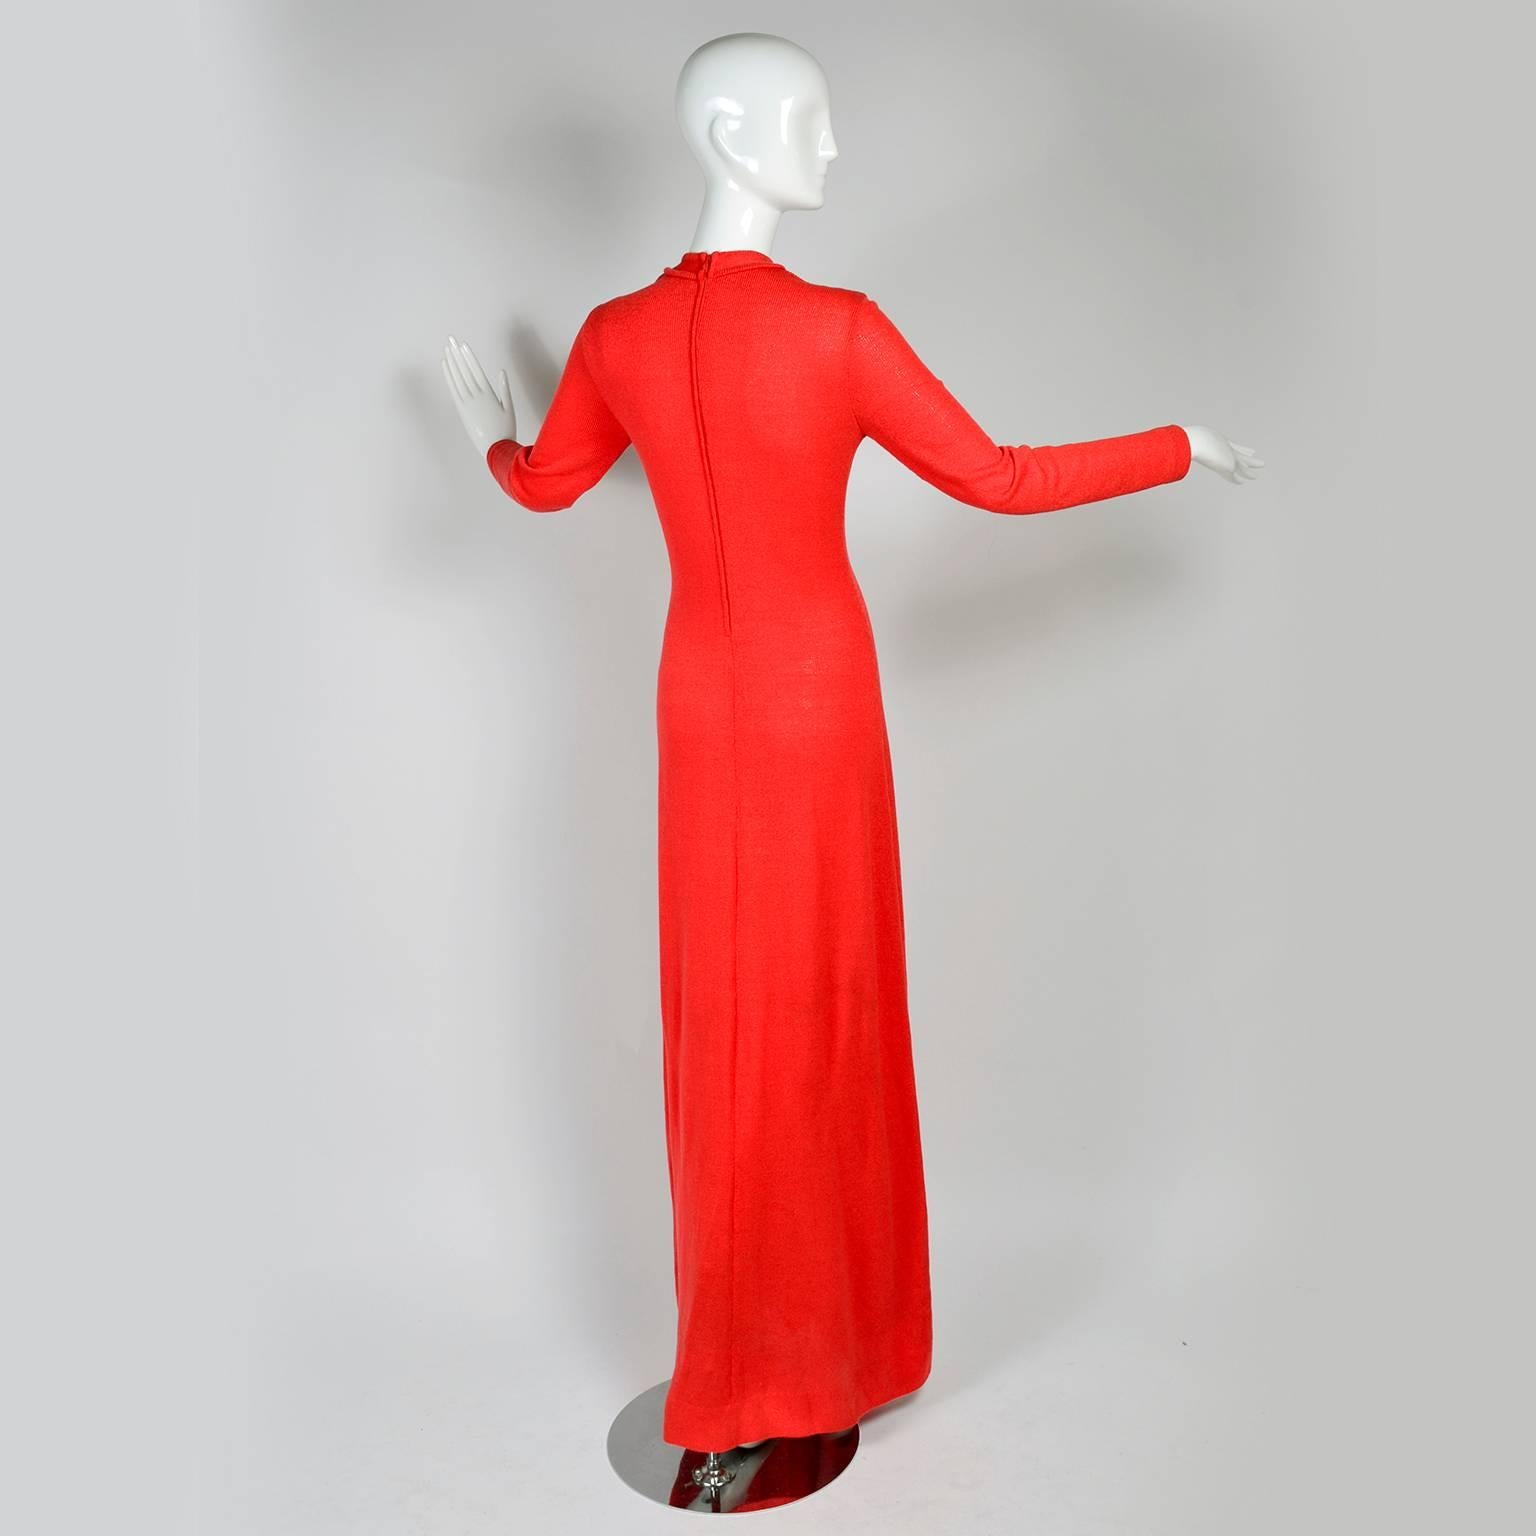 1970s Orange Red Knit Dress With Keyhole Openings Made in Italy 1